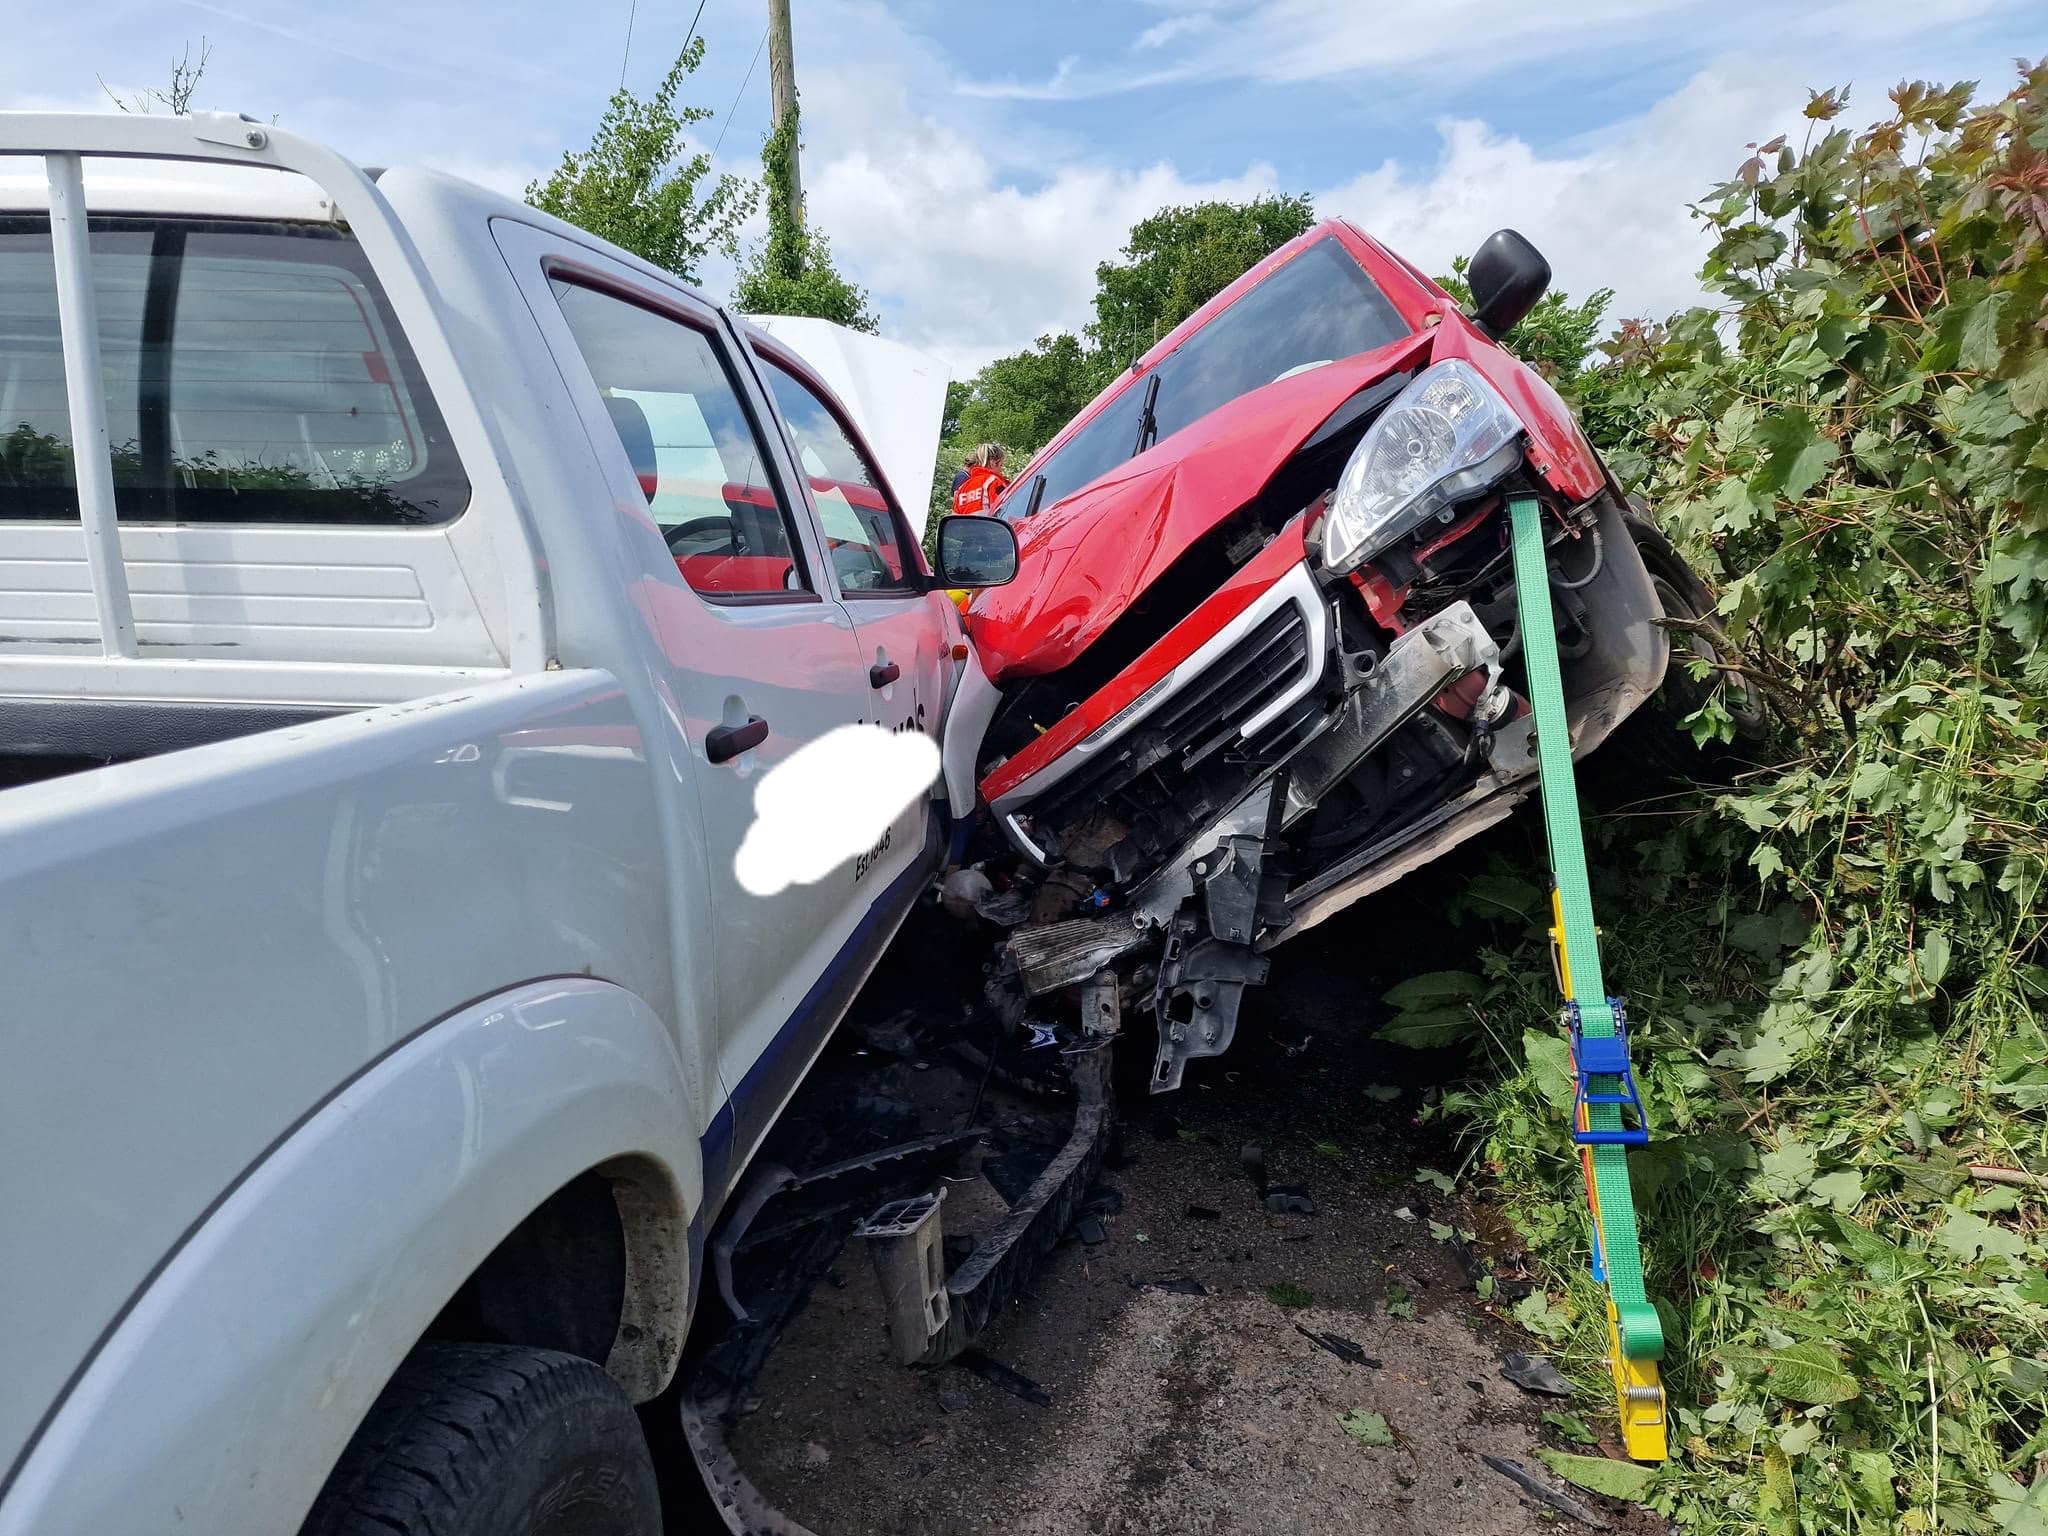 NEWS | Emergency services called to collision in area where overgrown verges have reduced visibility